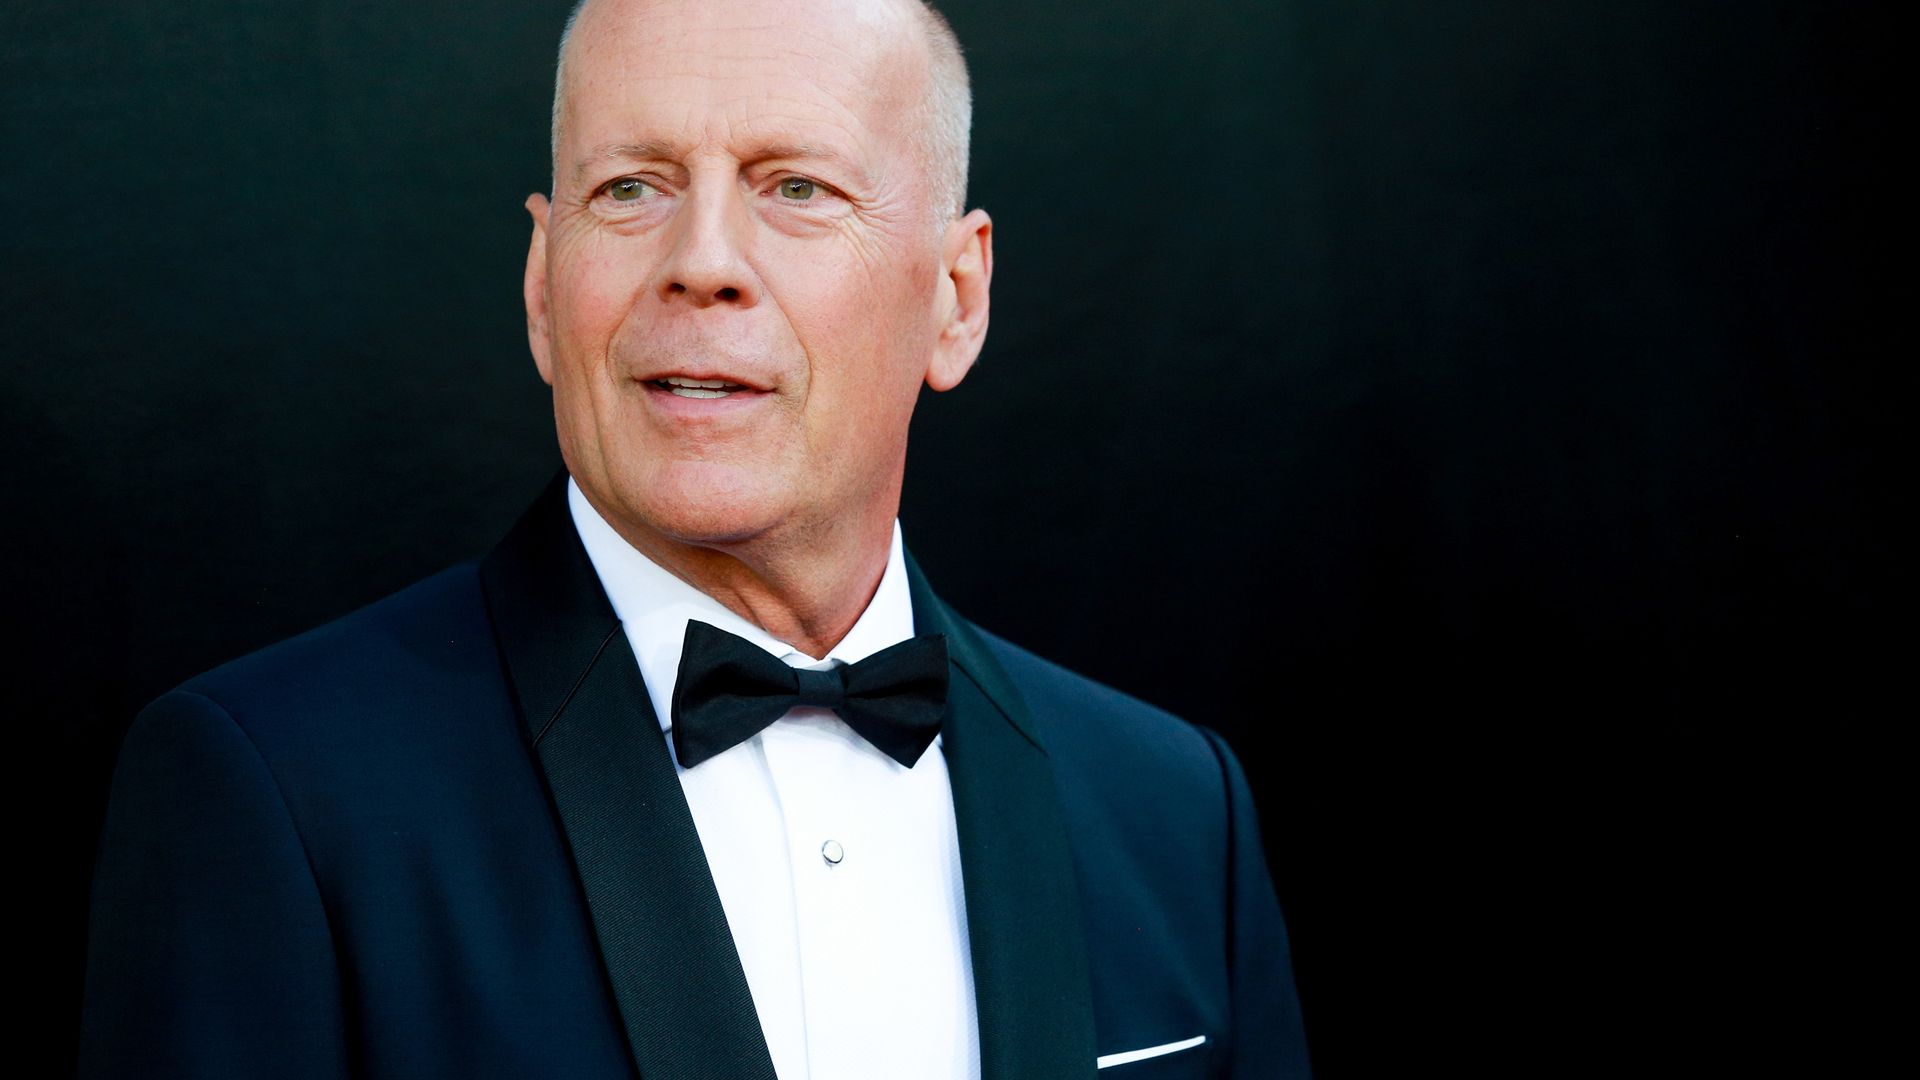 Bruce Willis speaks and sings in uplifting new video amid dementia diagnosis